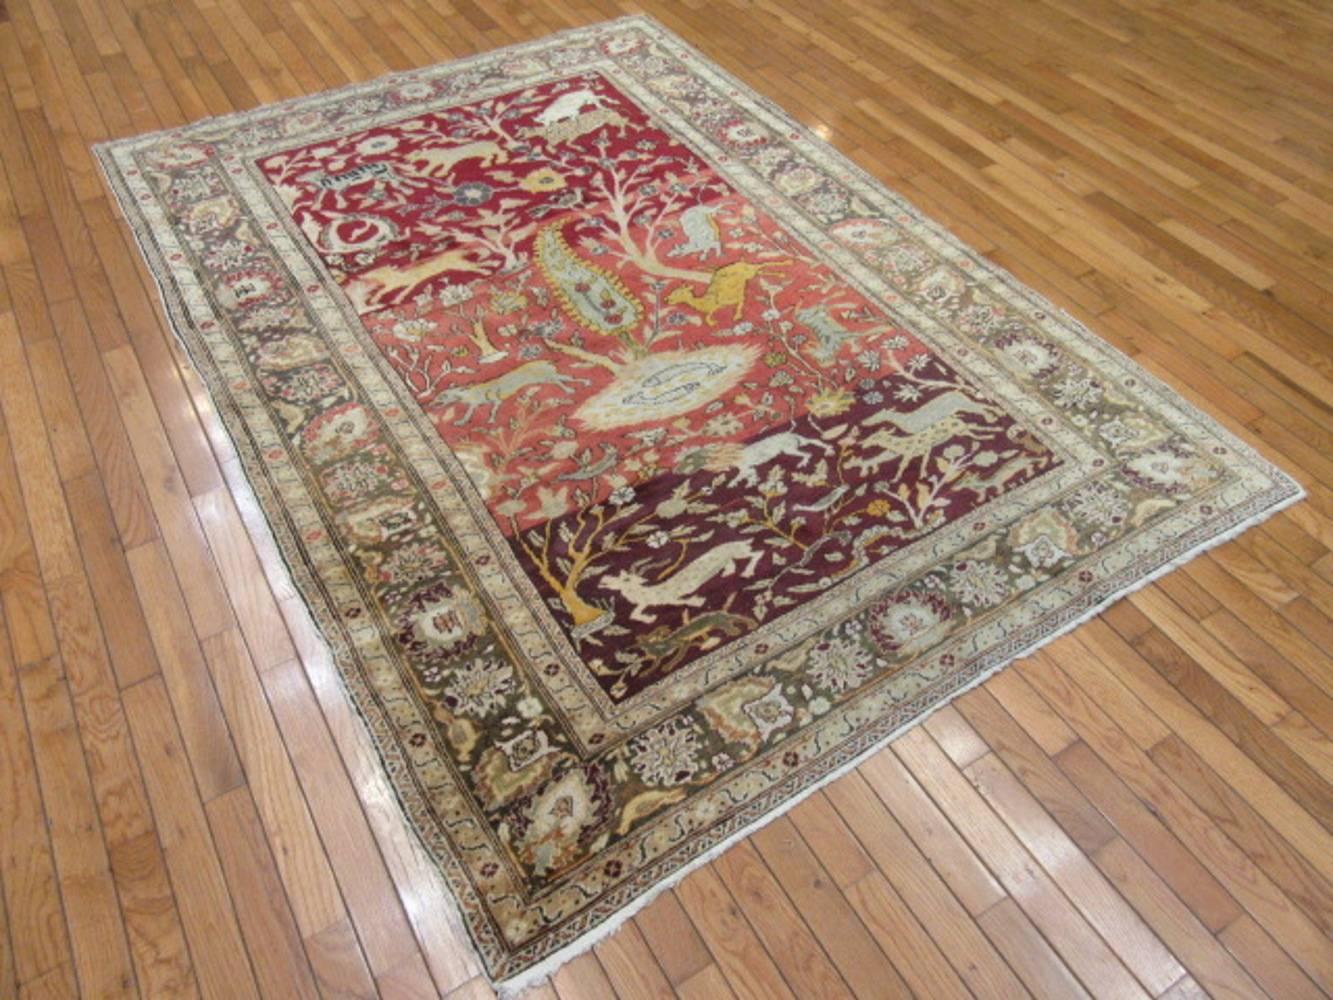 Small Semi-Antique Hand-Knotted Wool Pictorial Turkish Rug 1